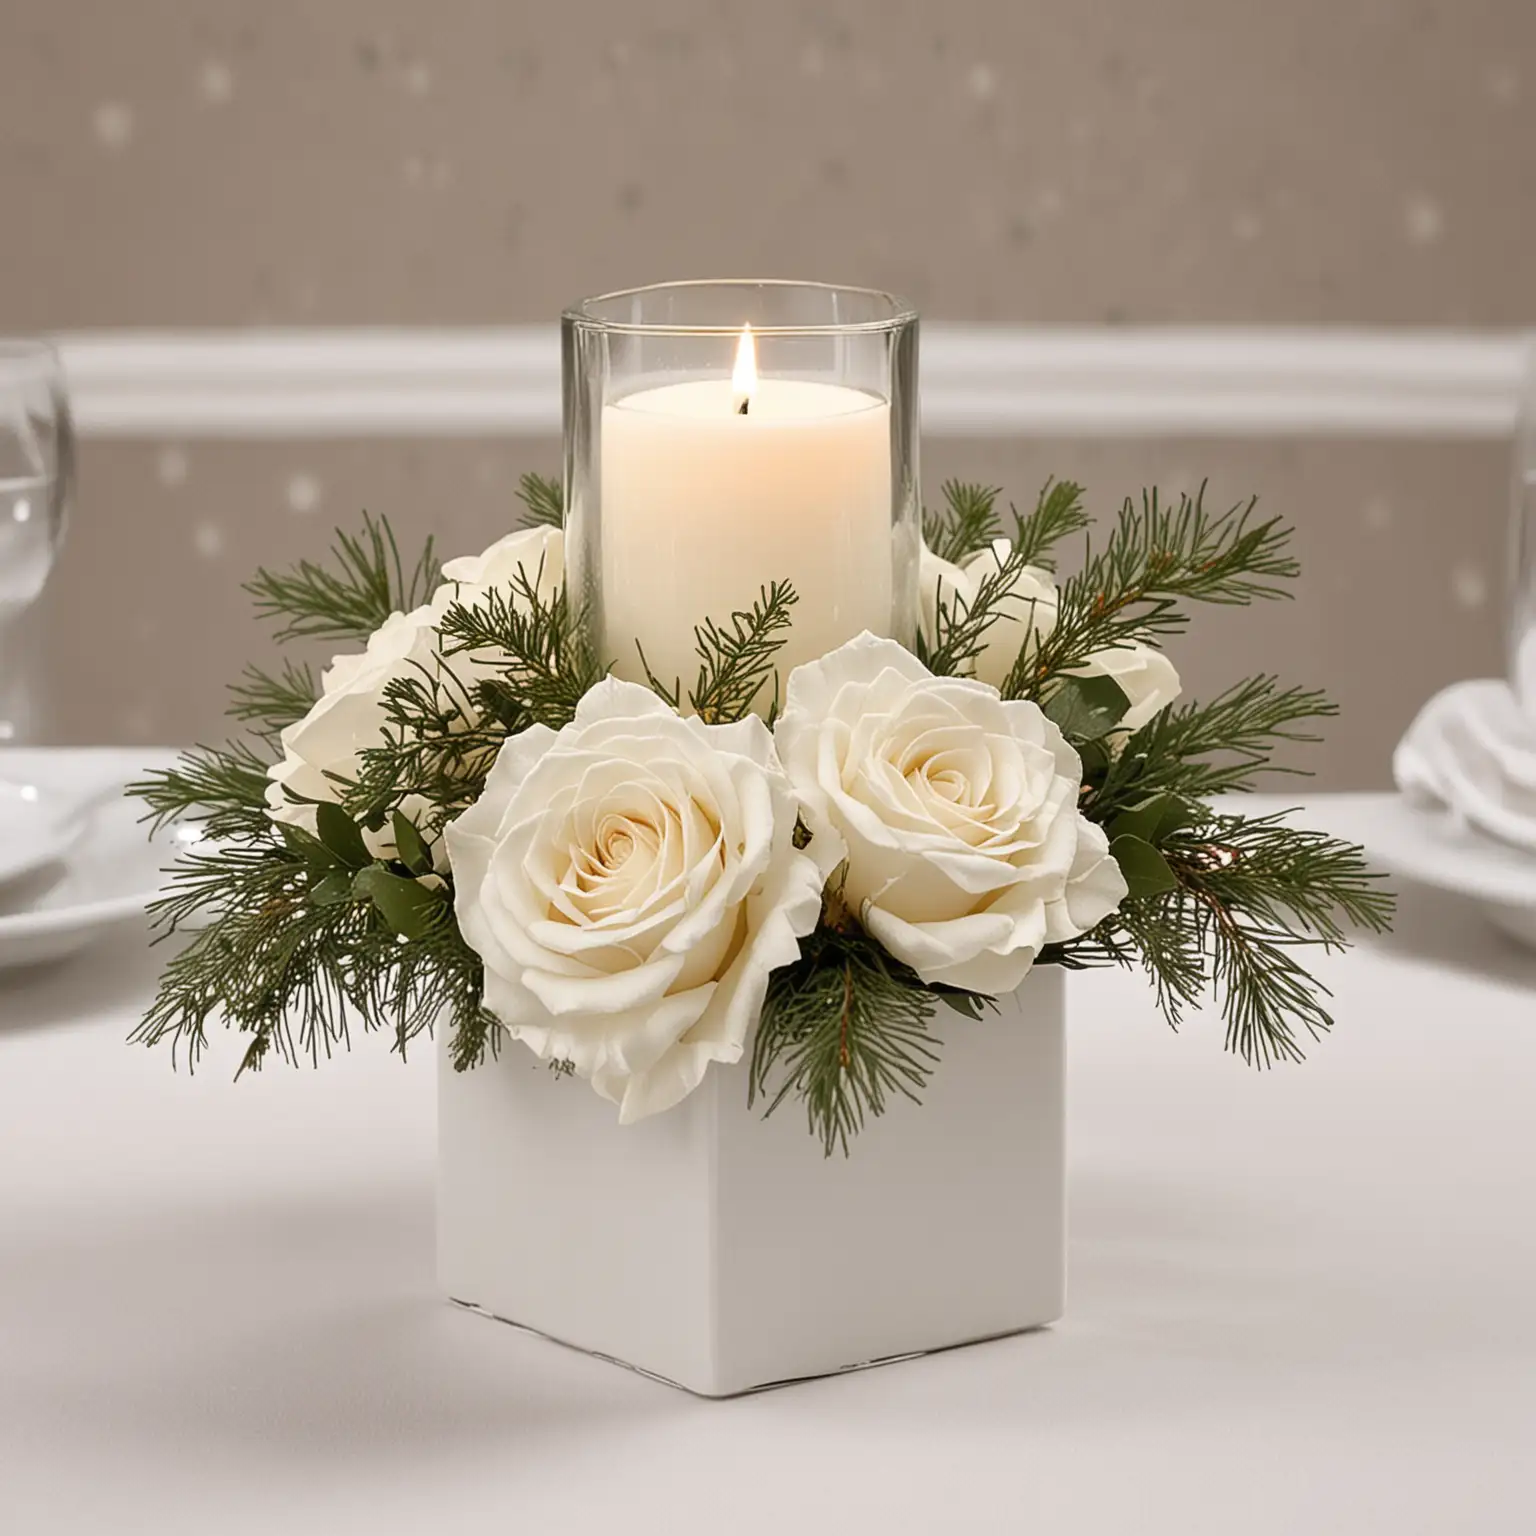 small DIY elegant white winter wedding centerpiece with white square vase ; use a neutral or white background